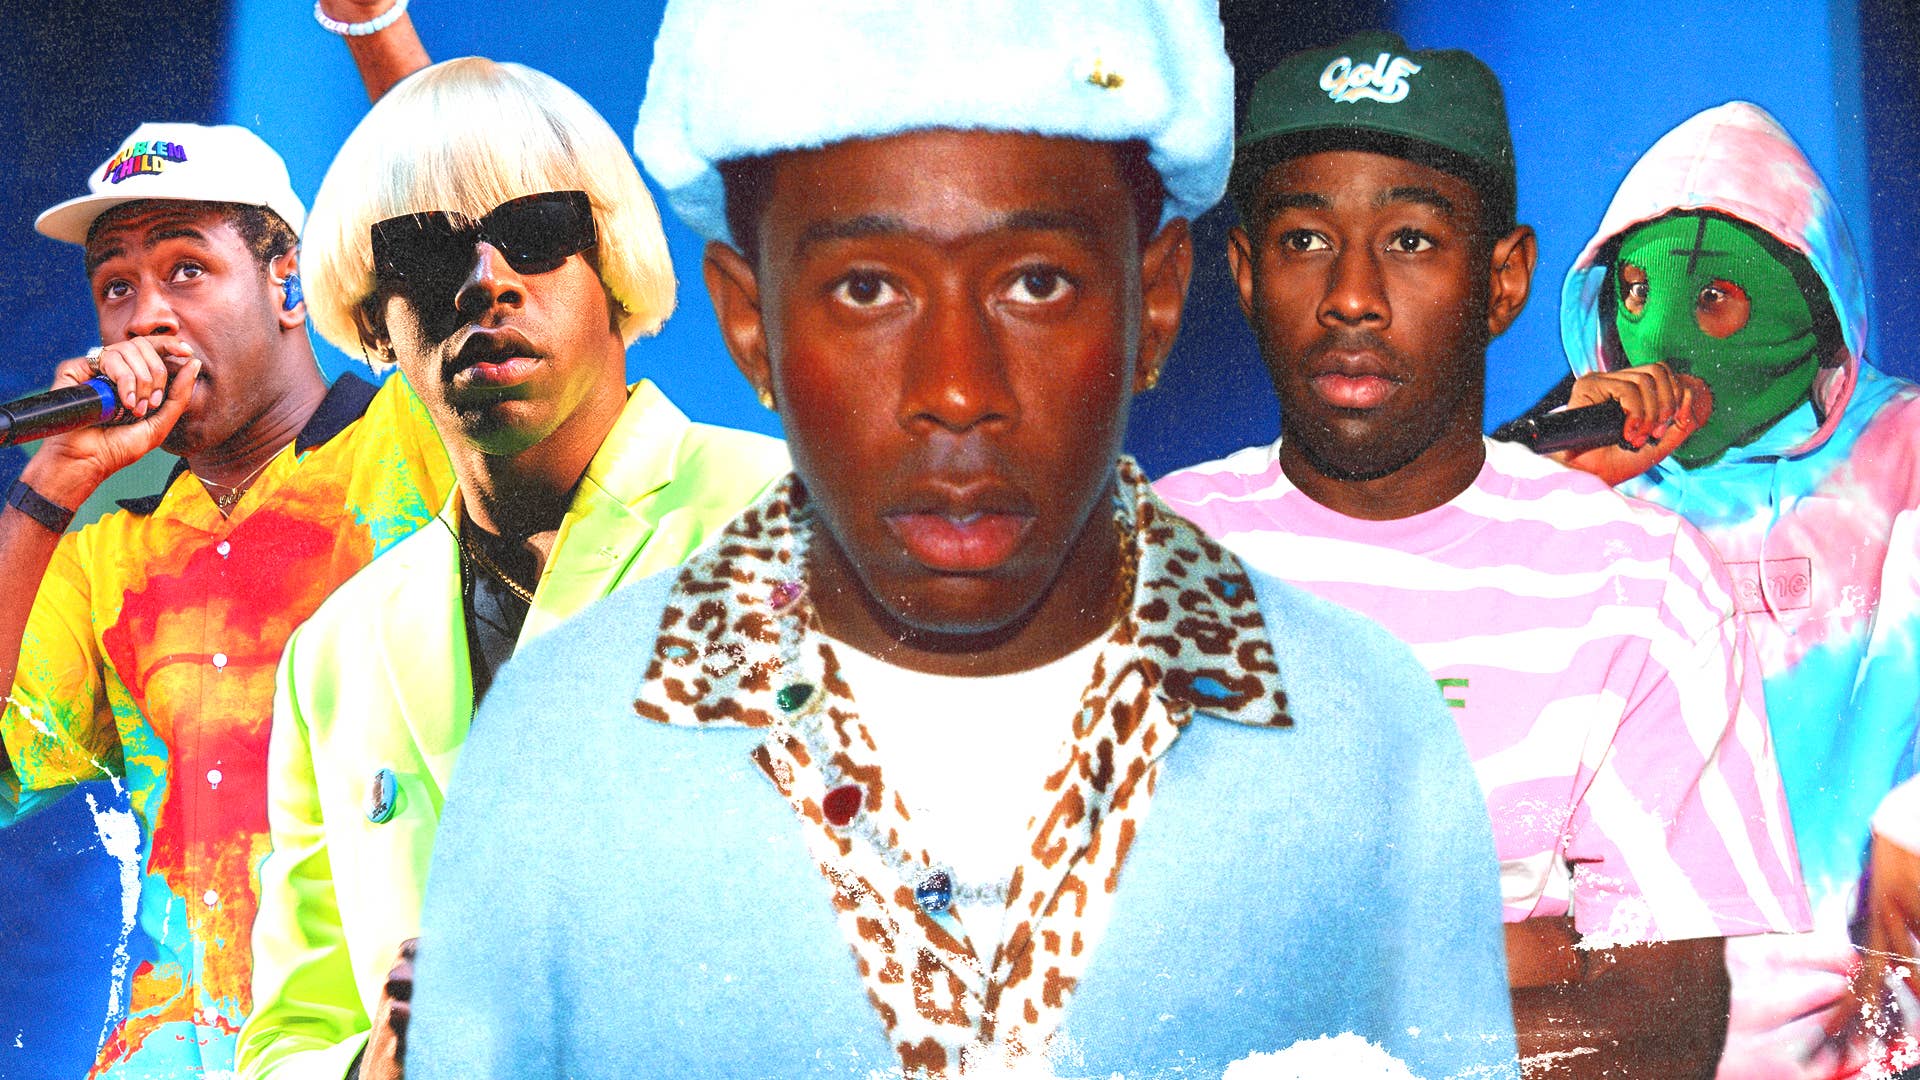 Top 25 Tyler The Creator Pictures & Photos.